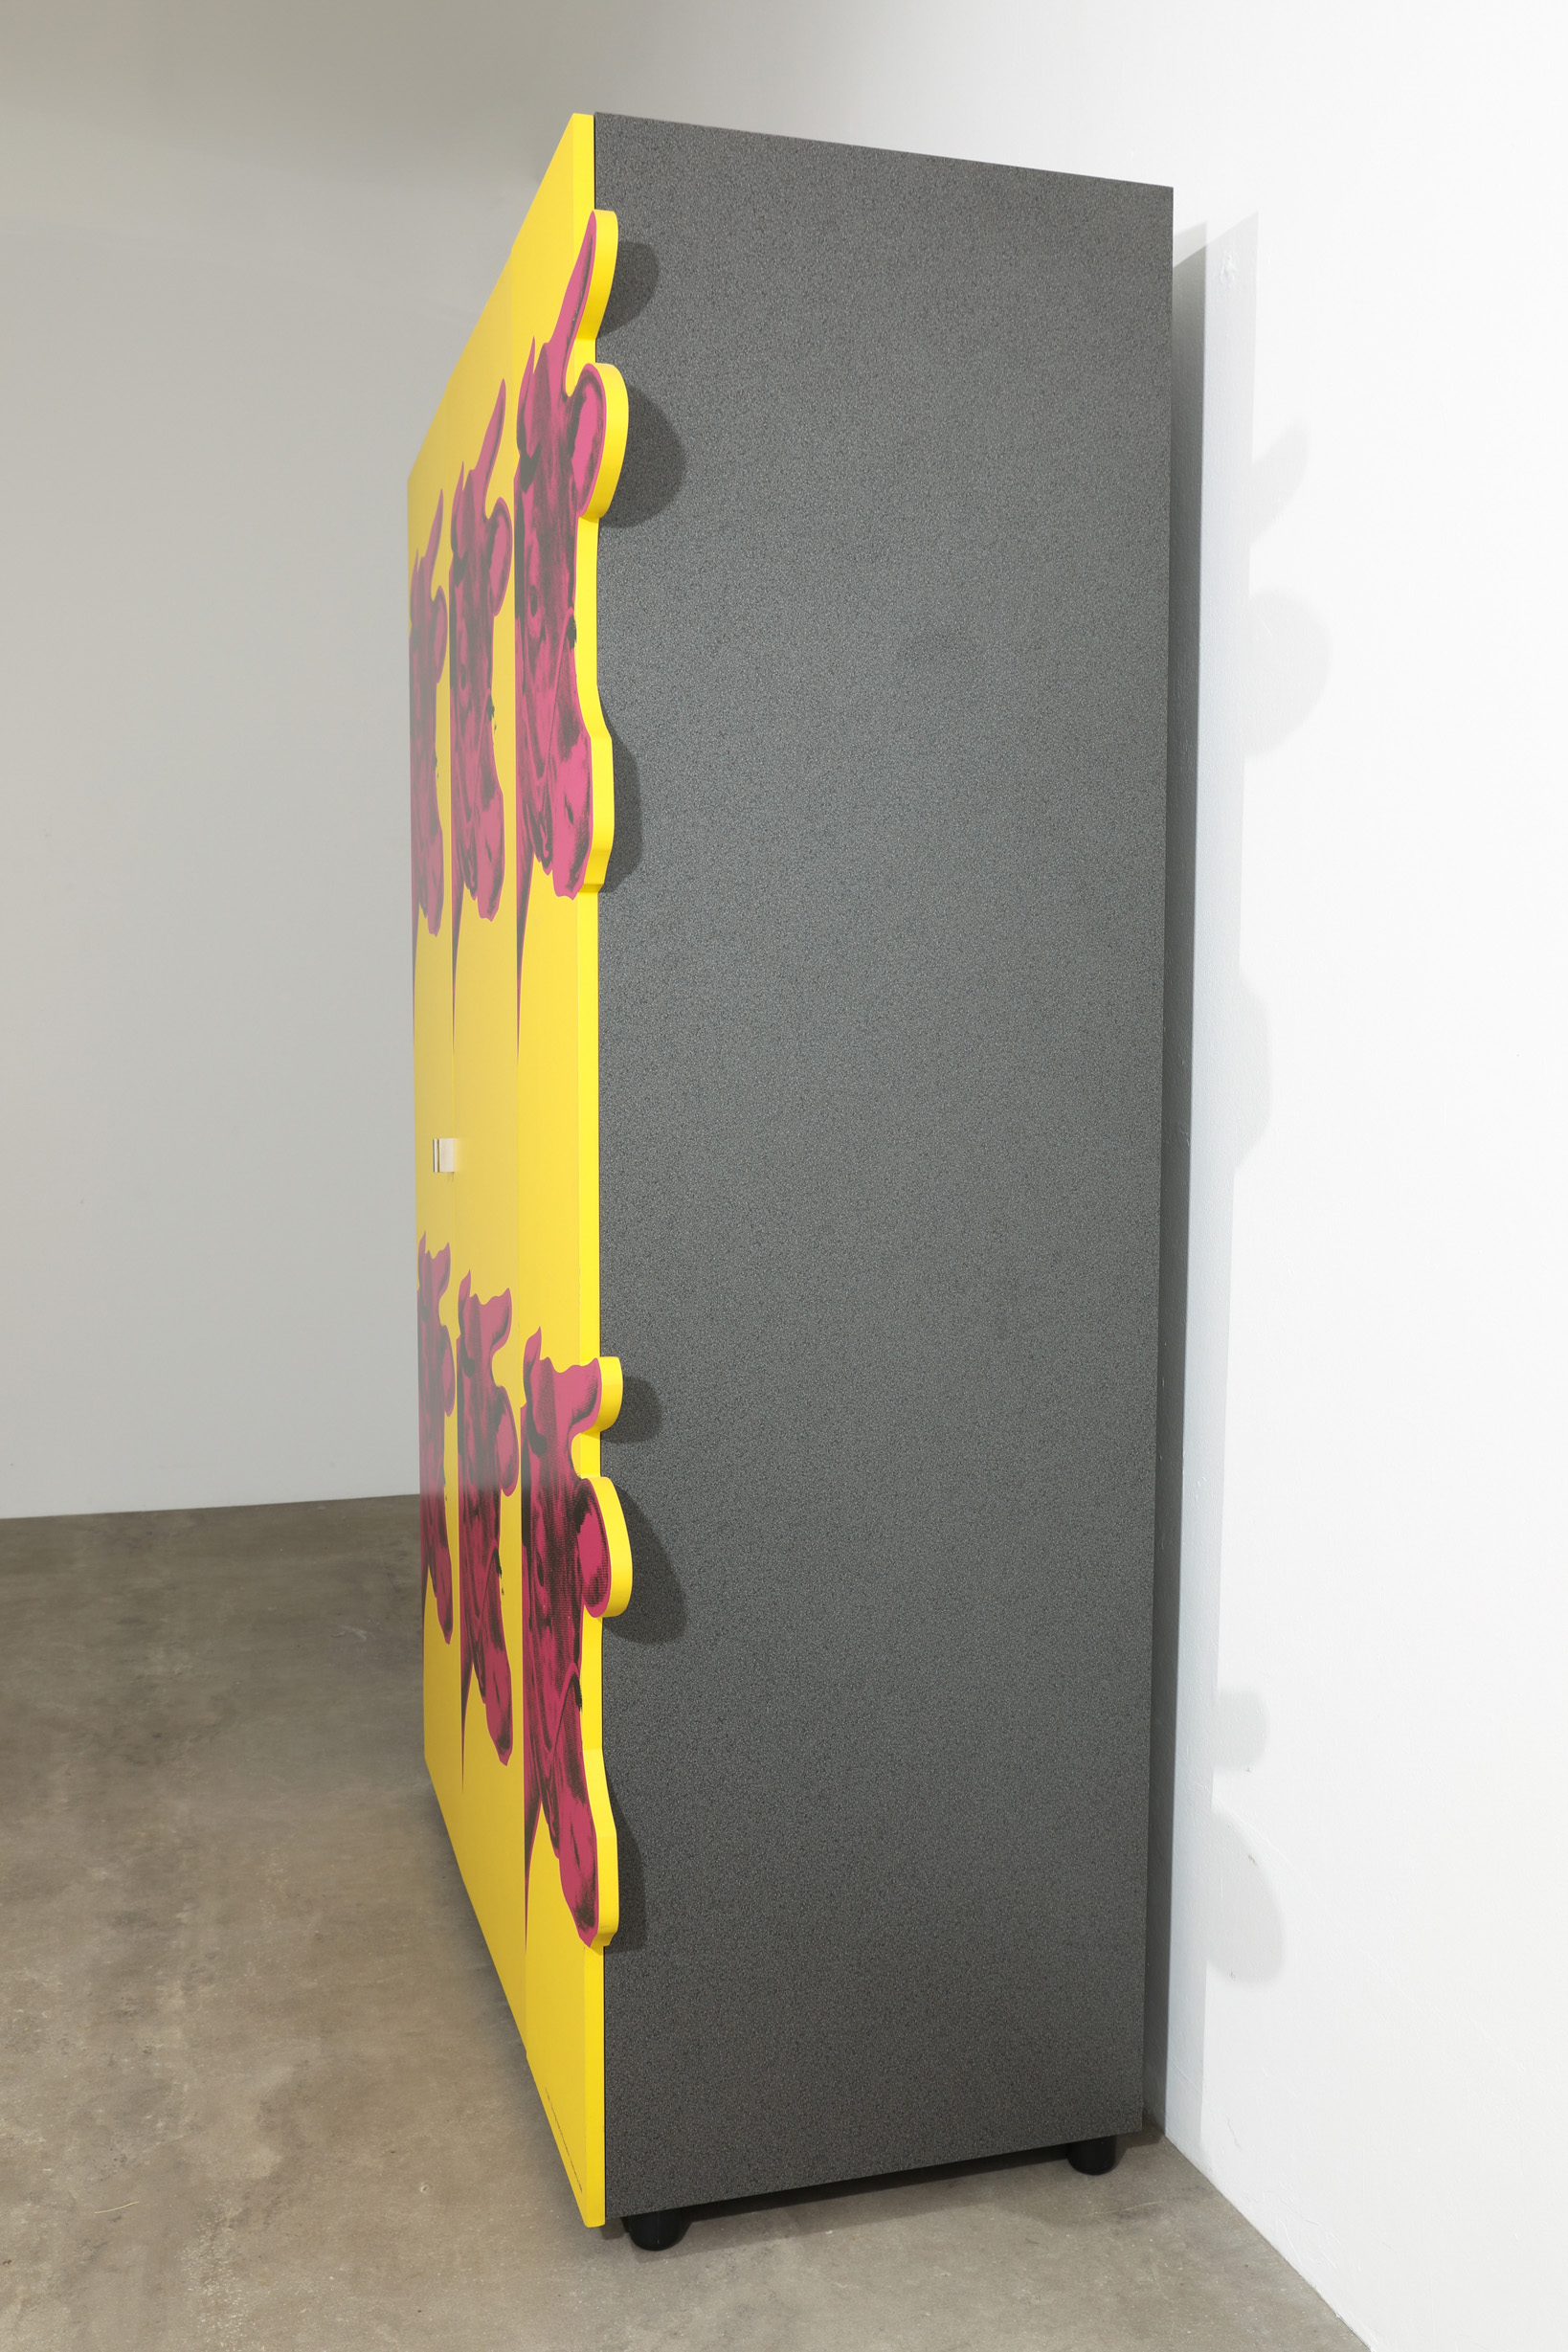 Andy Warhol, hb Collection, limited Cabinet with the Cow Wallpaper motif - Image 7 of 9